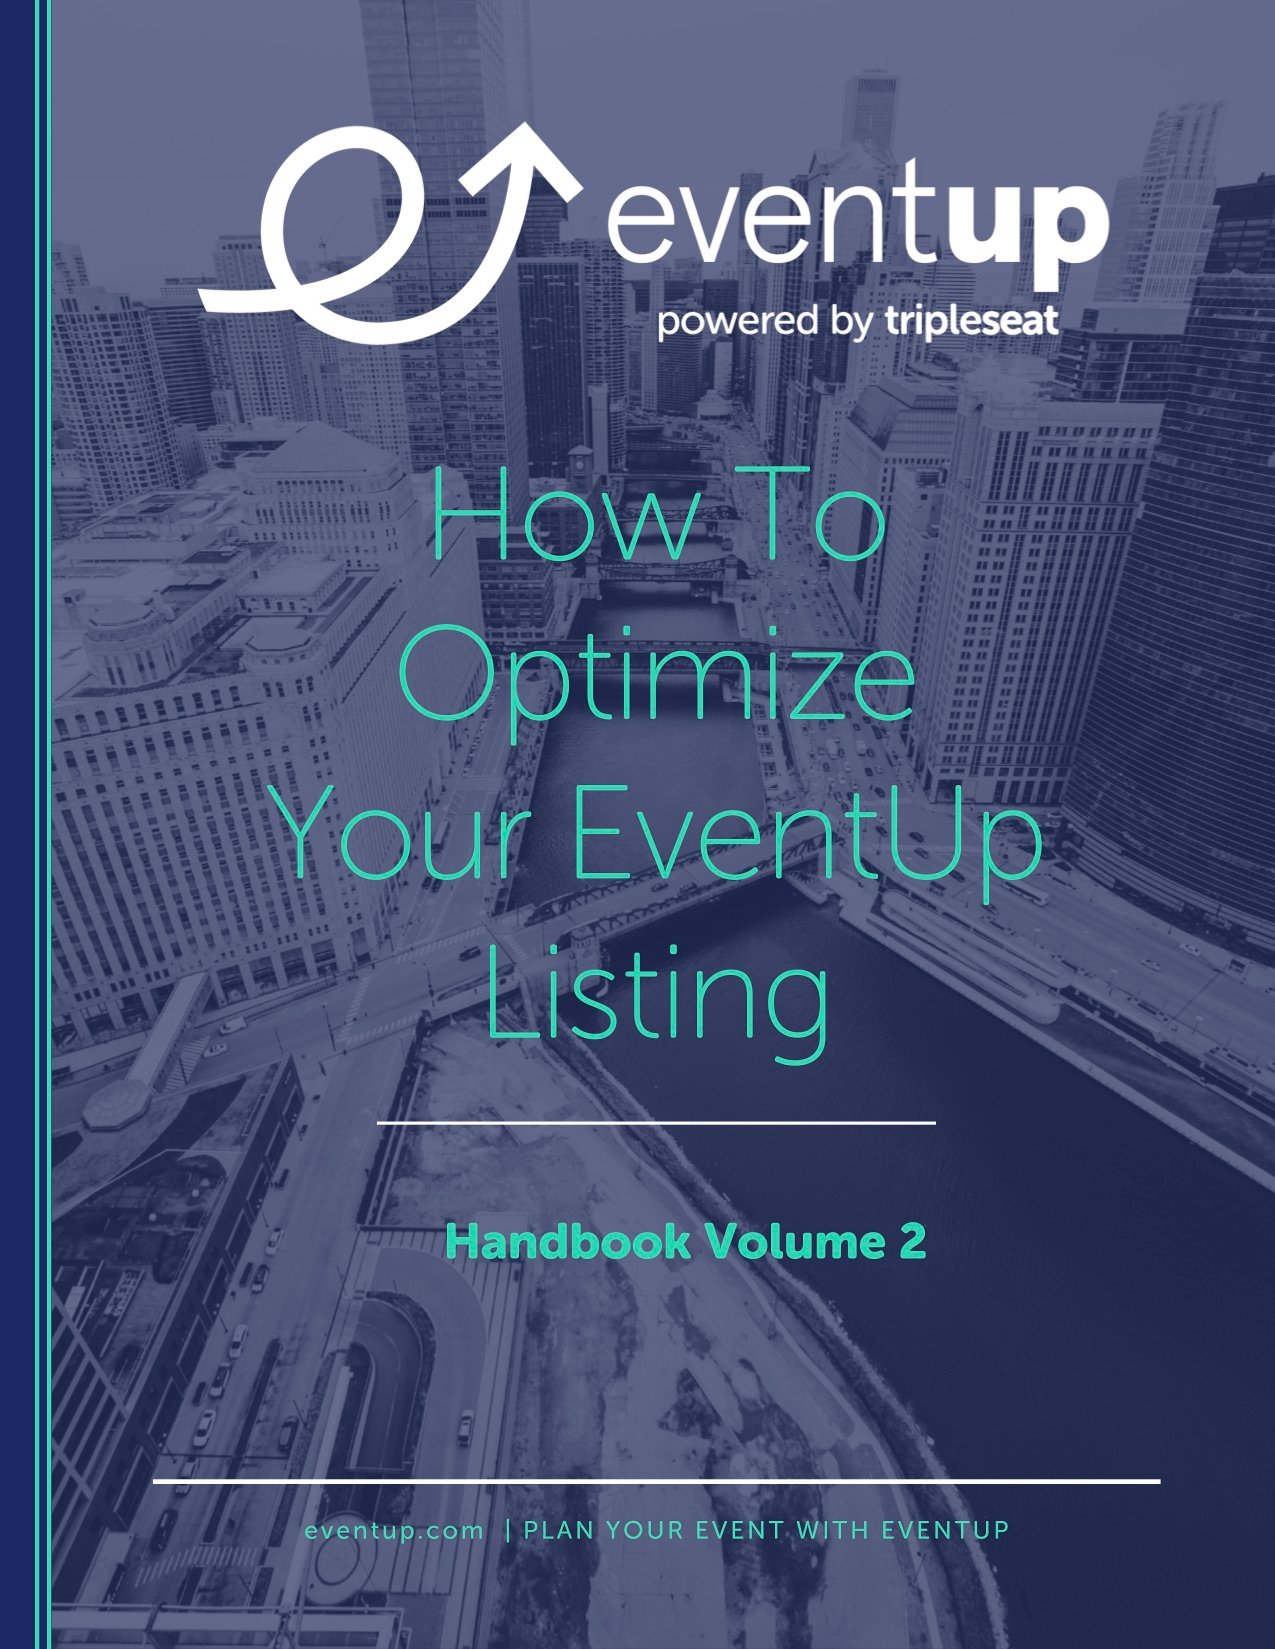 Handbook Vol 2 - How To Optimize Your EventUp Listing